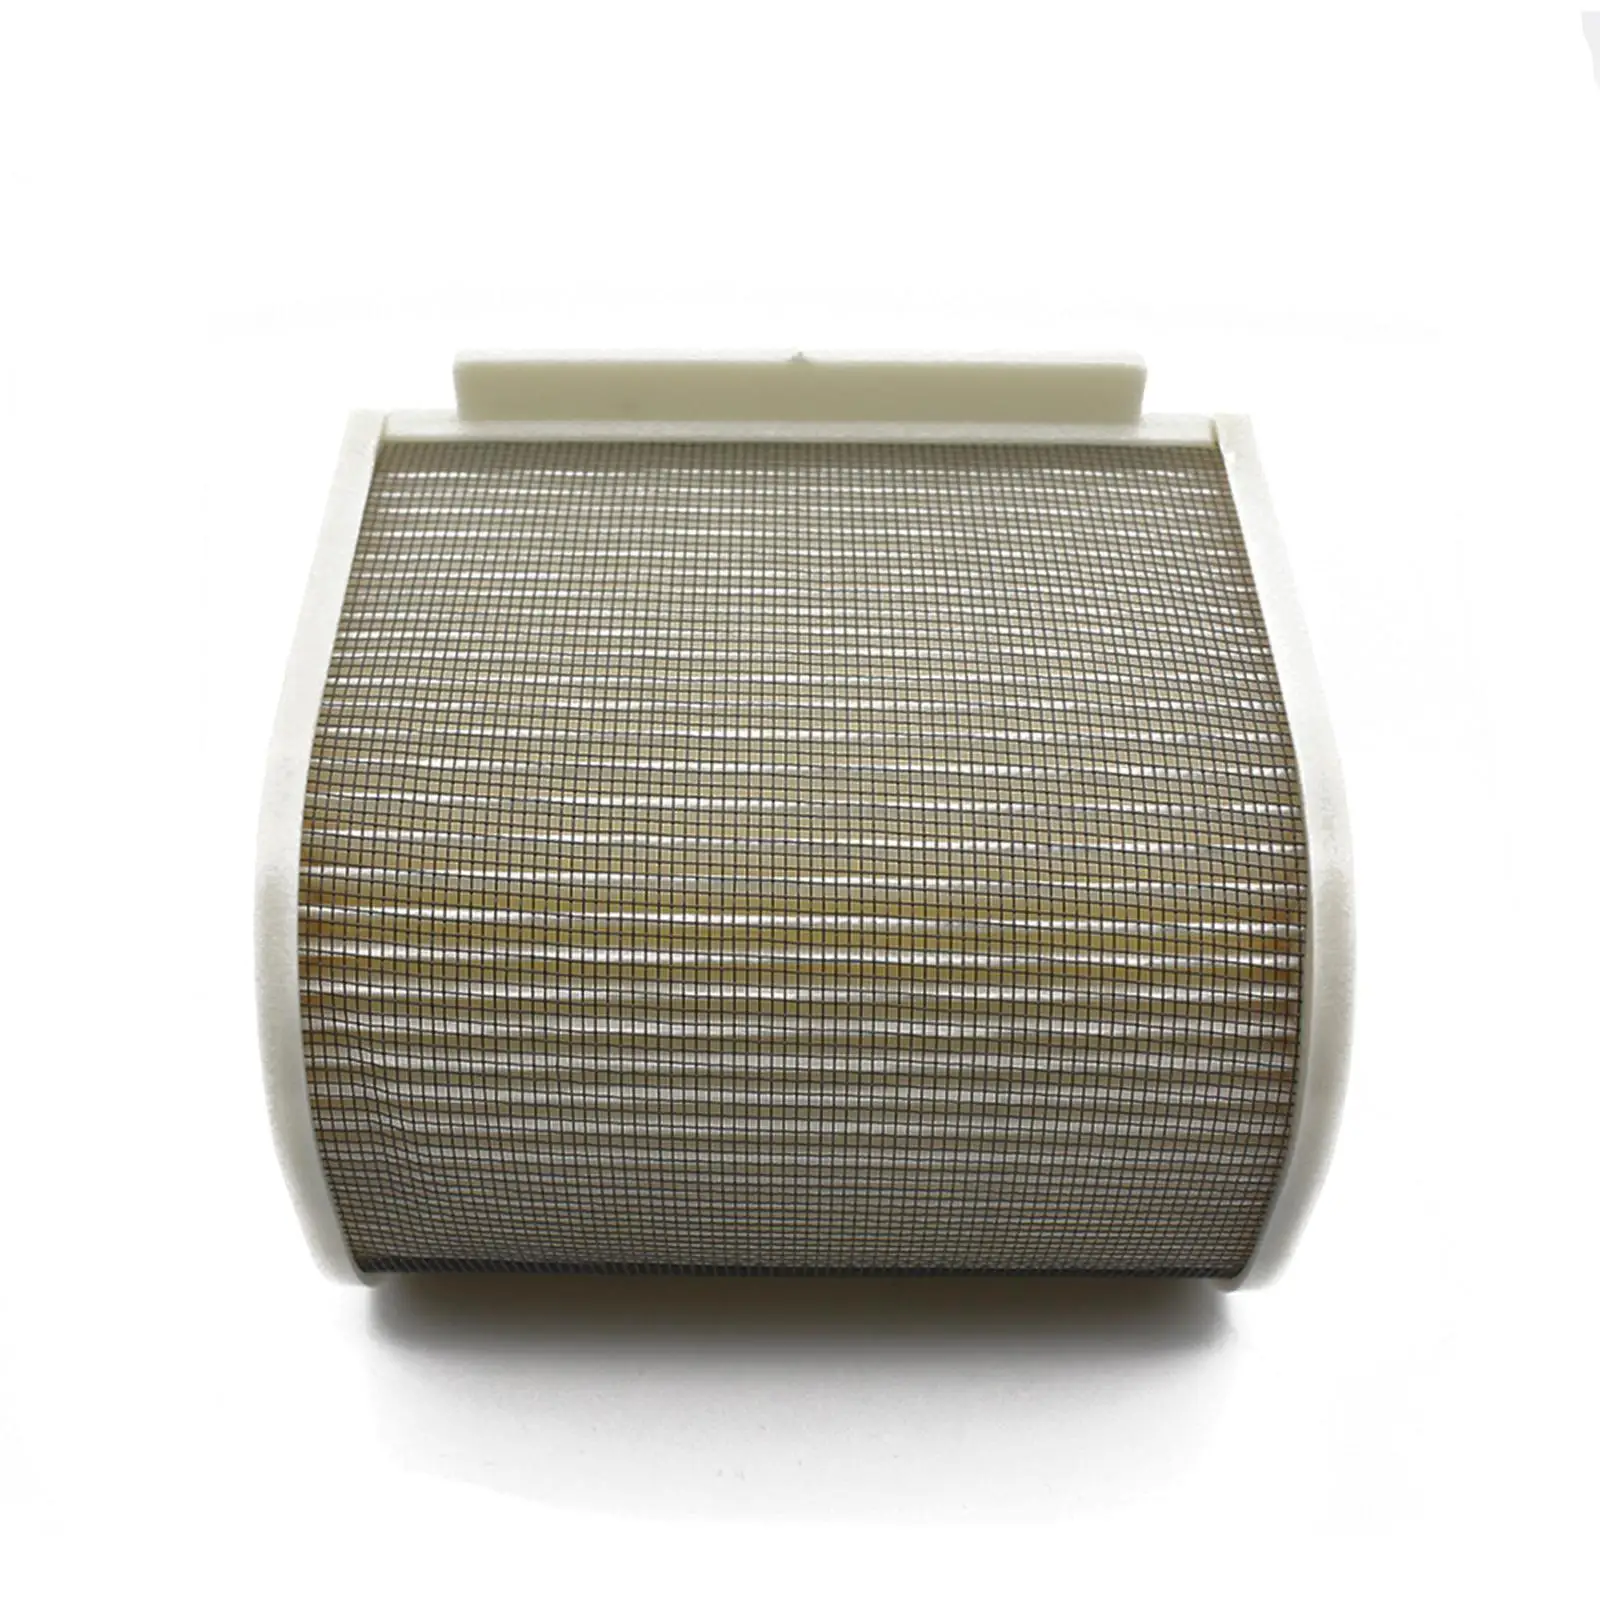 Motorcycle Air Filter for Yamaha XJR1300 1998-2006 Accessory Replaces